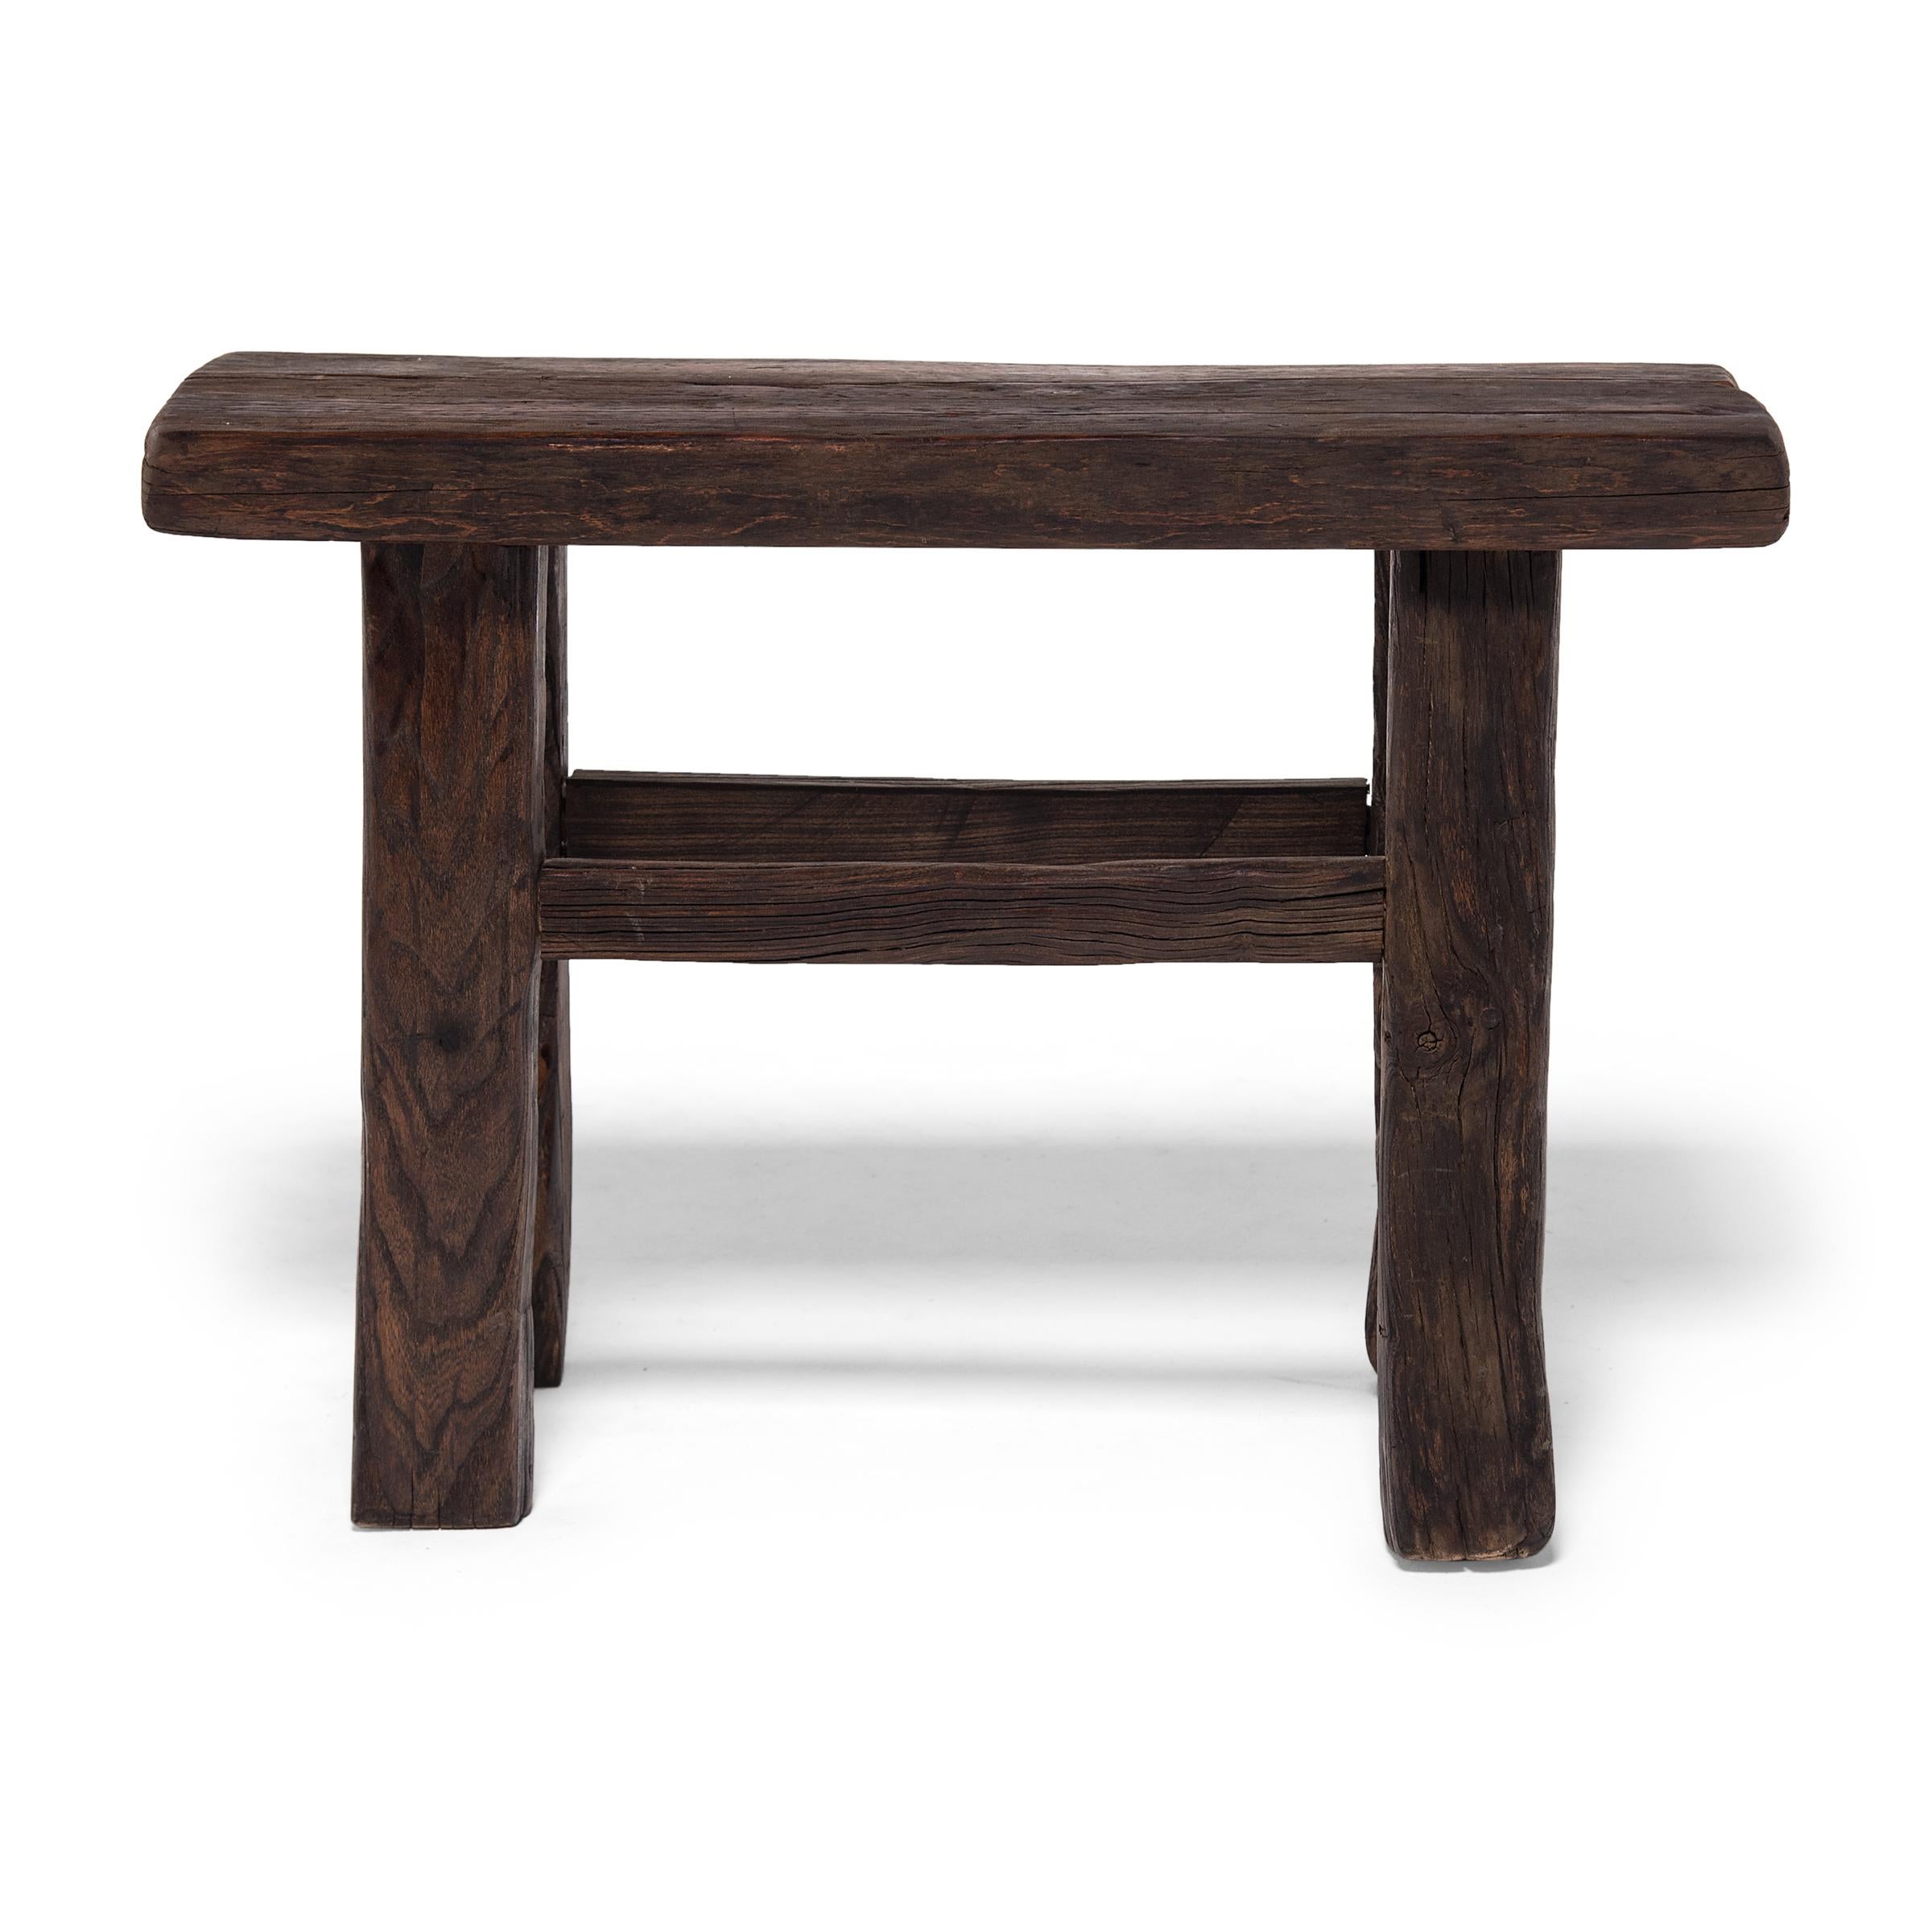 Made of wood reclaimed from 18th century Chinese buildings, this petite door bench brings the farmhouse modern aesthetic to traditional forms. Skilled in traditional joinery techniques, our craftspeople fashioned this simple bench to resemble those